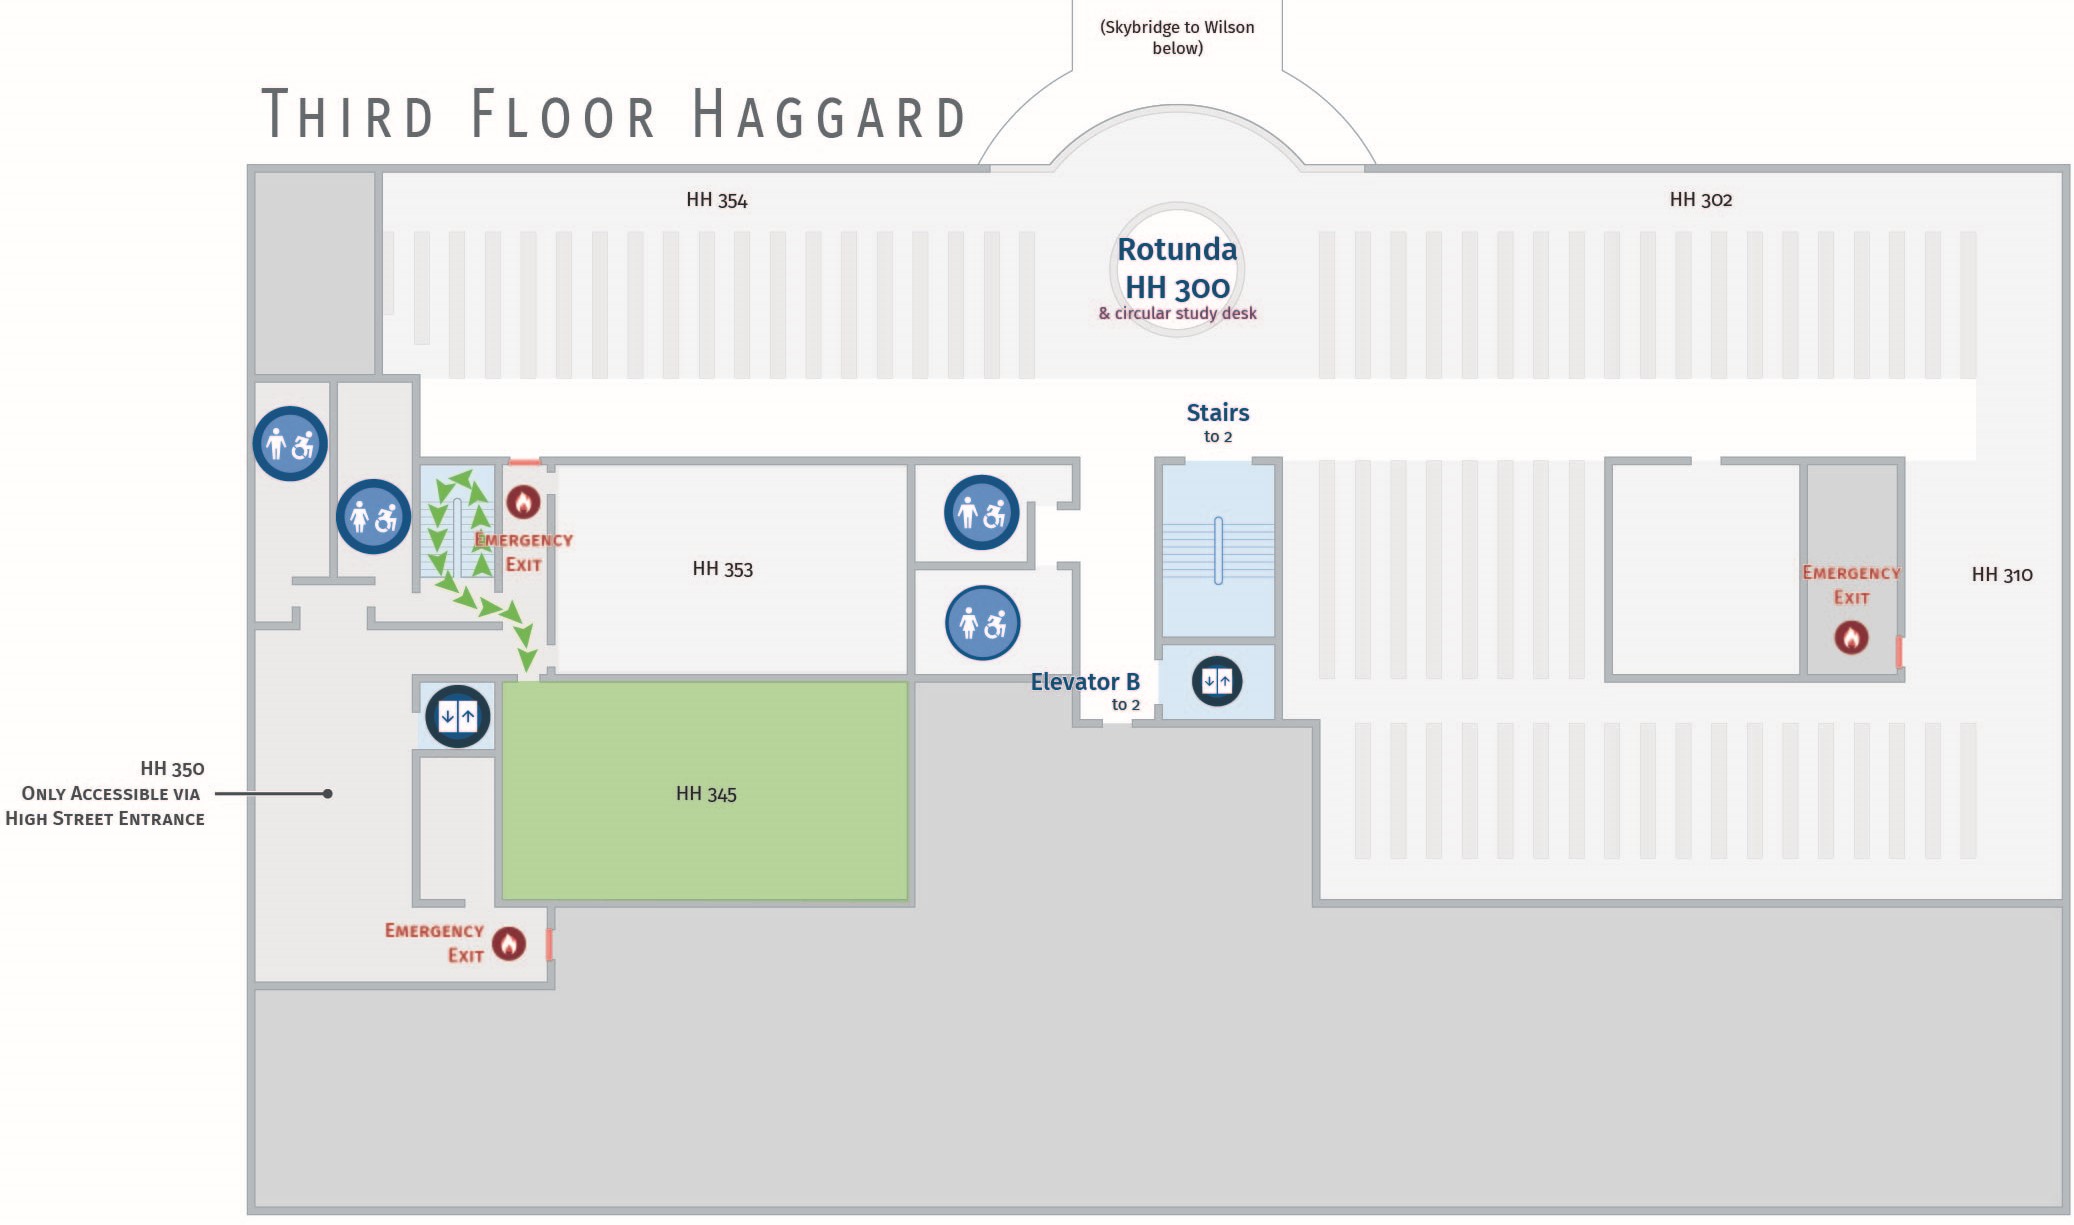 Floor plan, third floor of Haggard with path to HH 345.